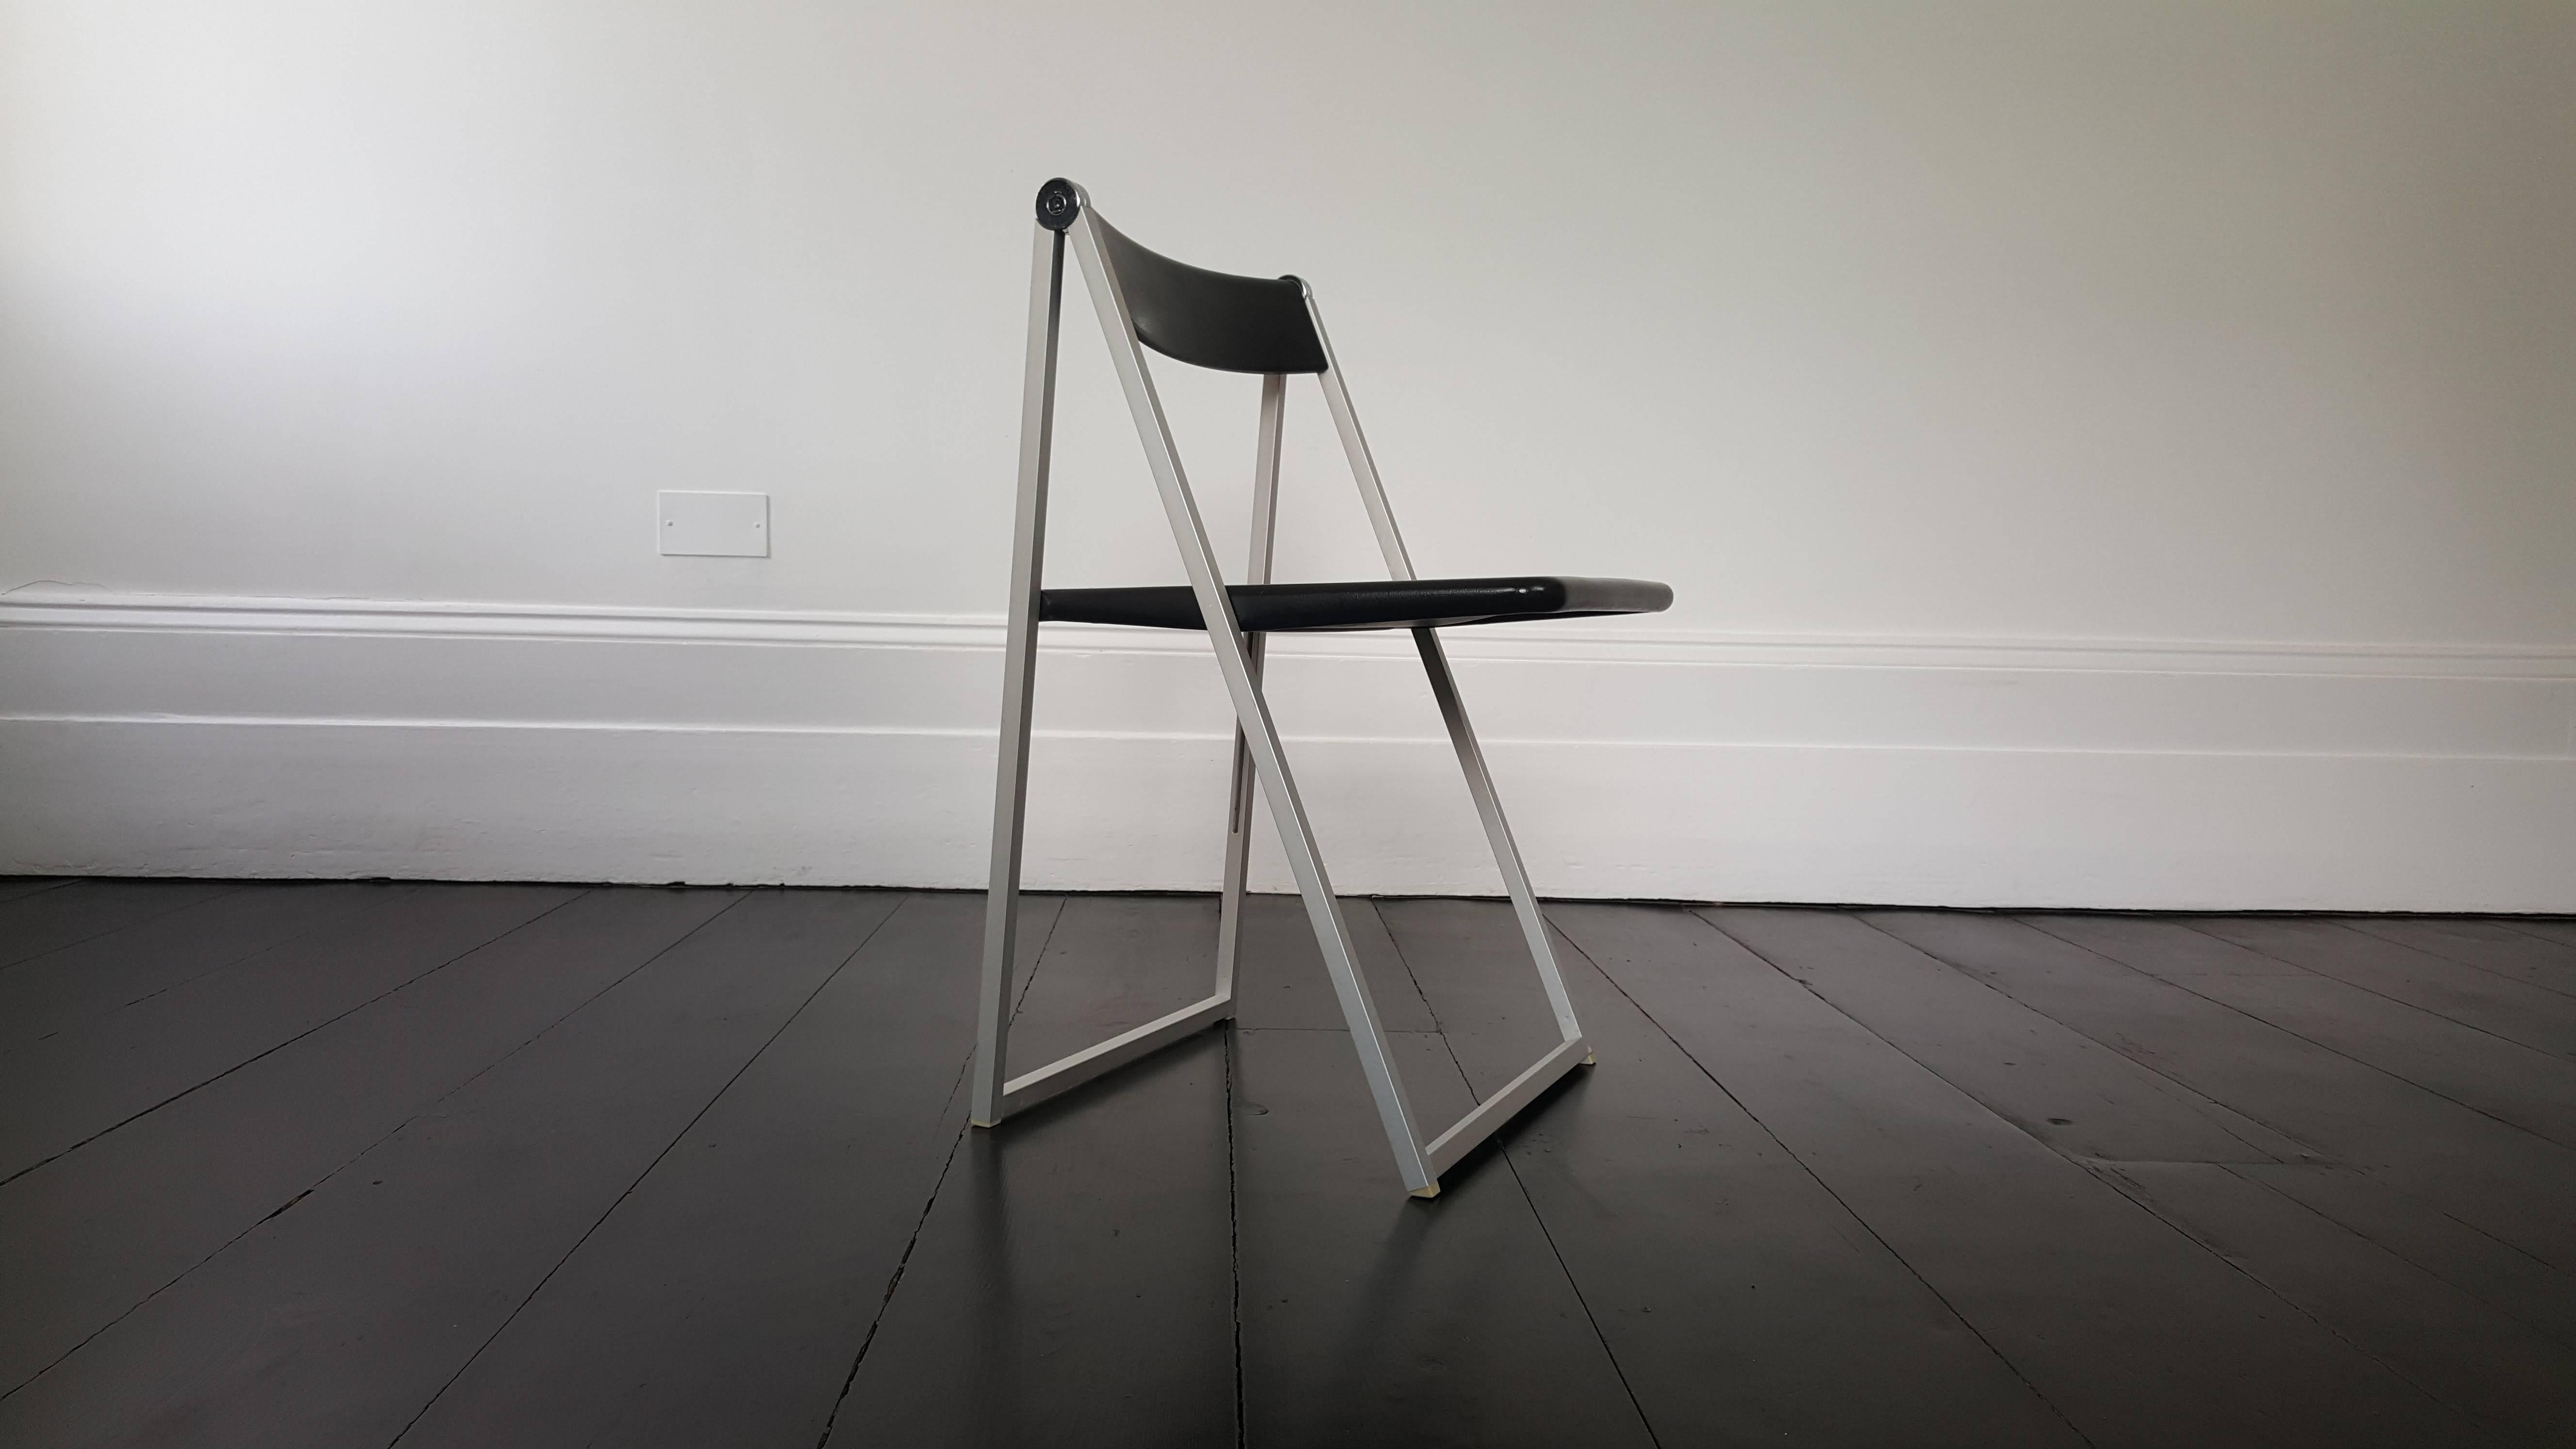 Upholstered Folding Chair, designed in 1971 by Team Form AG, manufactured by Interlübke. 

Great Minimalist design wonderfully engineered and manufactured to very high standard. 

We provide very competitive global shipping rates per your